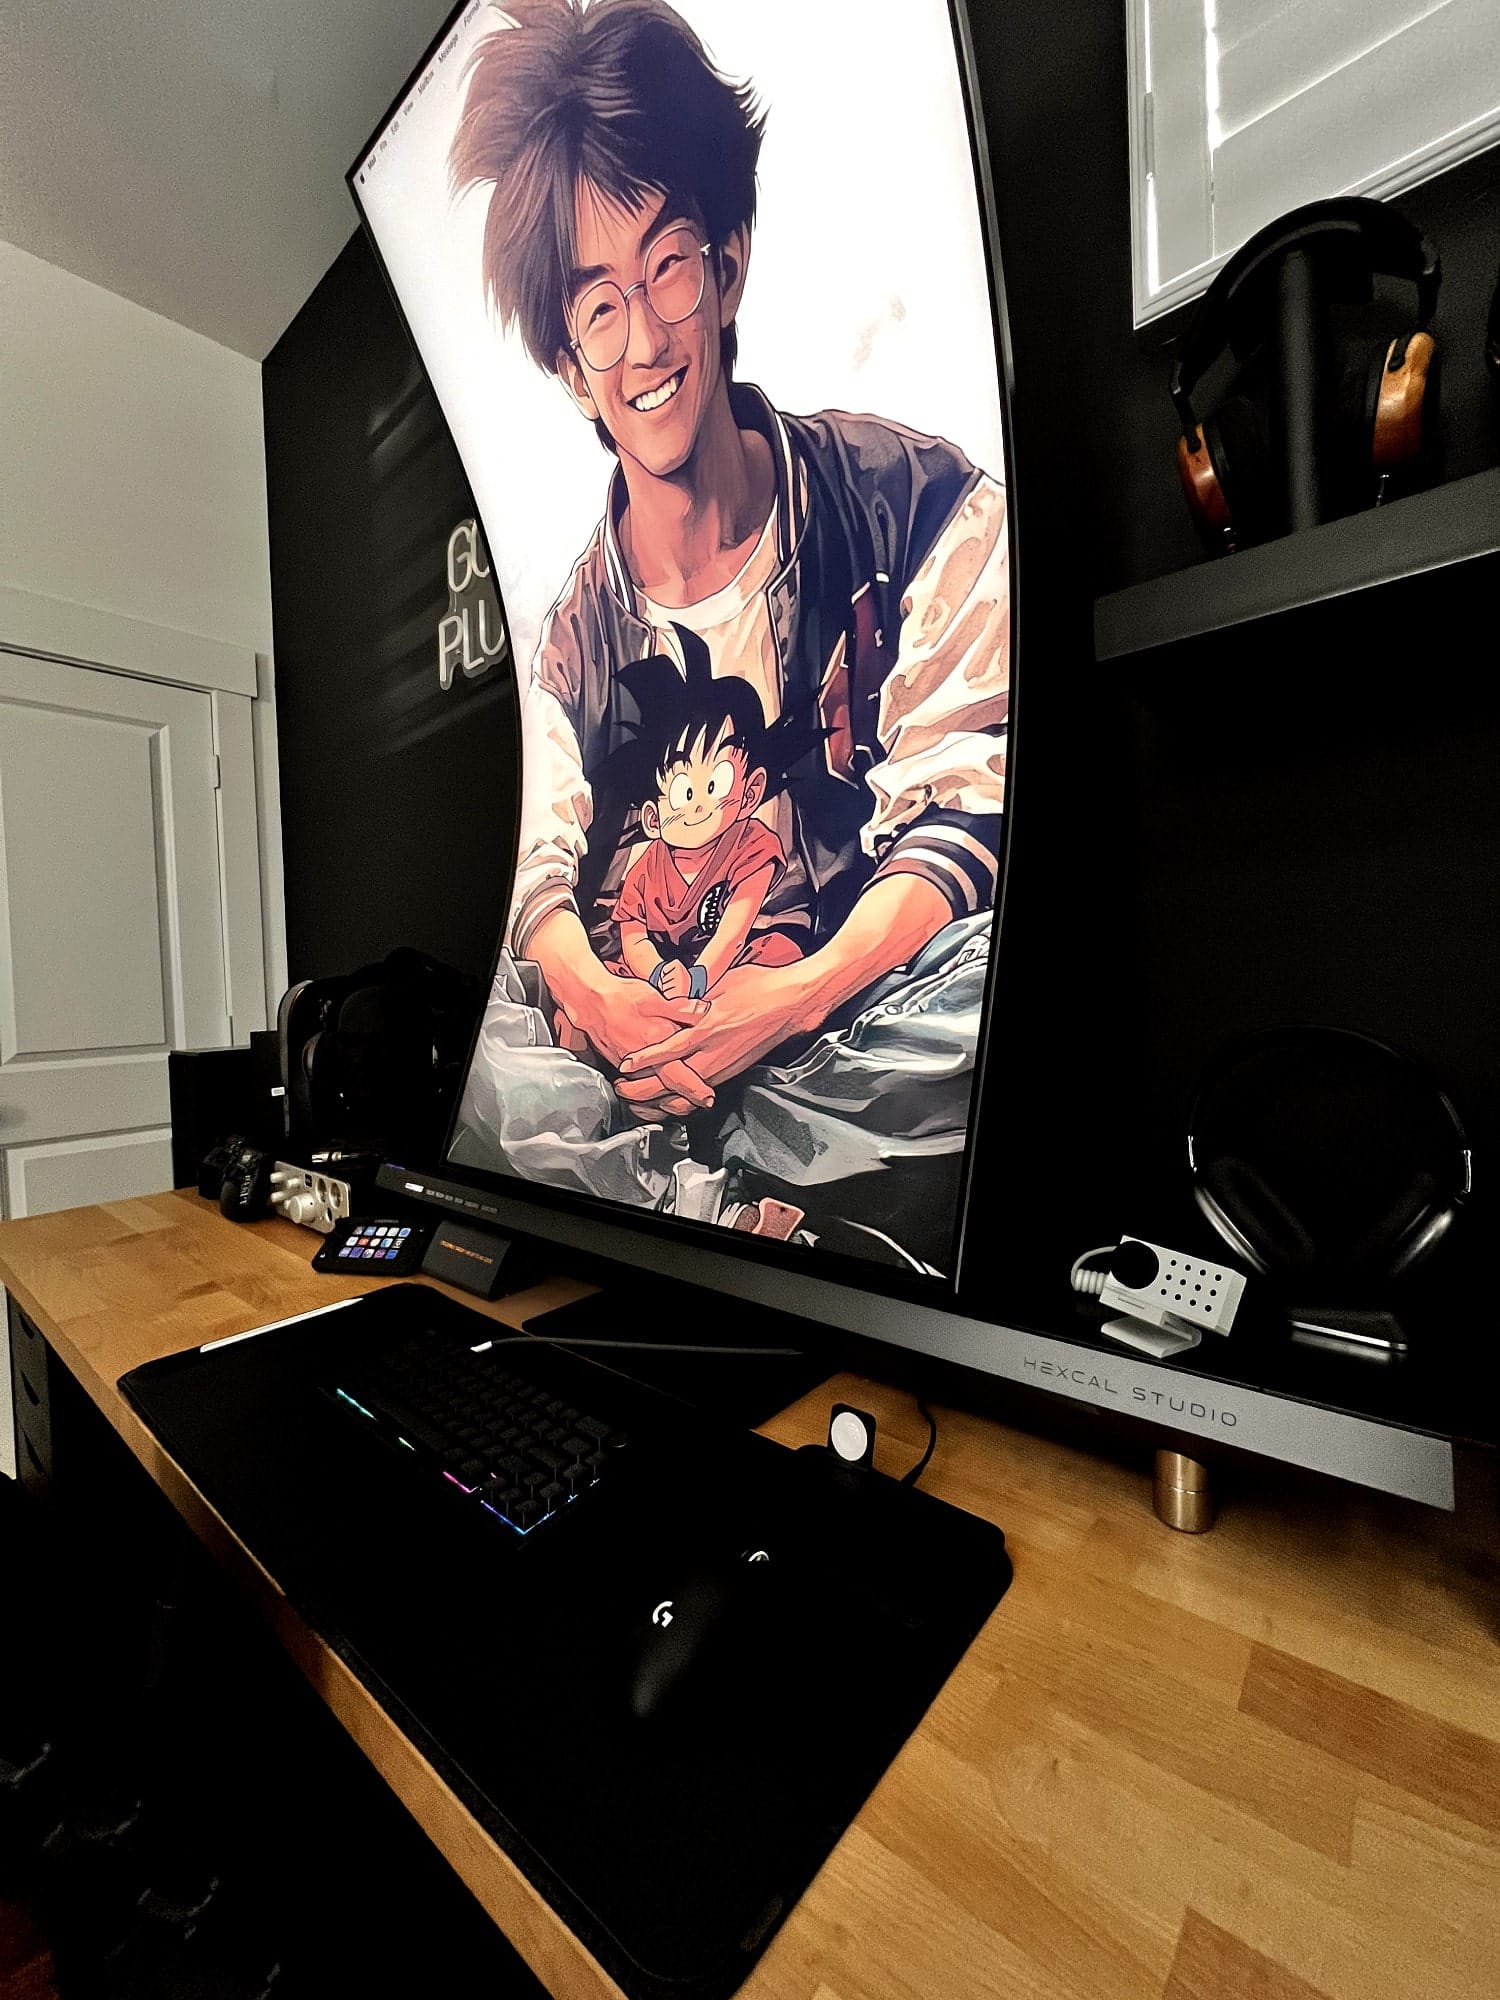 A modern gaming setup with a large curved monitor displaying an anime character, a mechanical keyboard, a gaming mouse, a Stream Deck, and headphones, all neatly arranged on a wooden desk